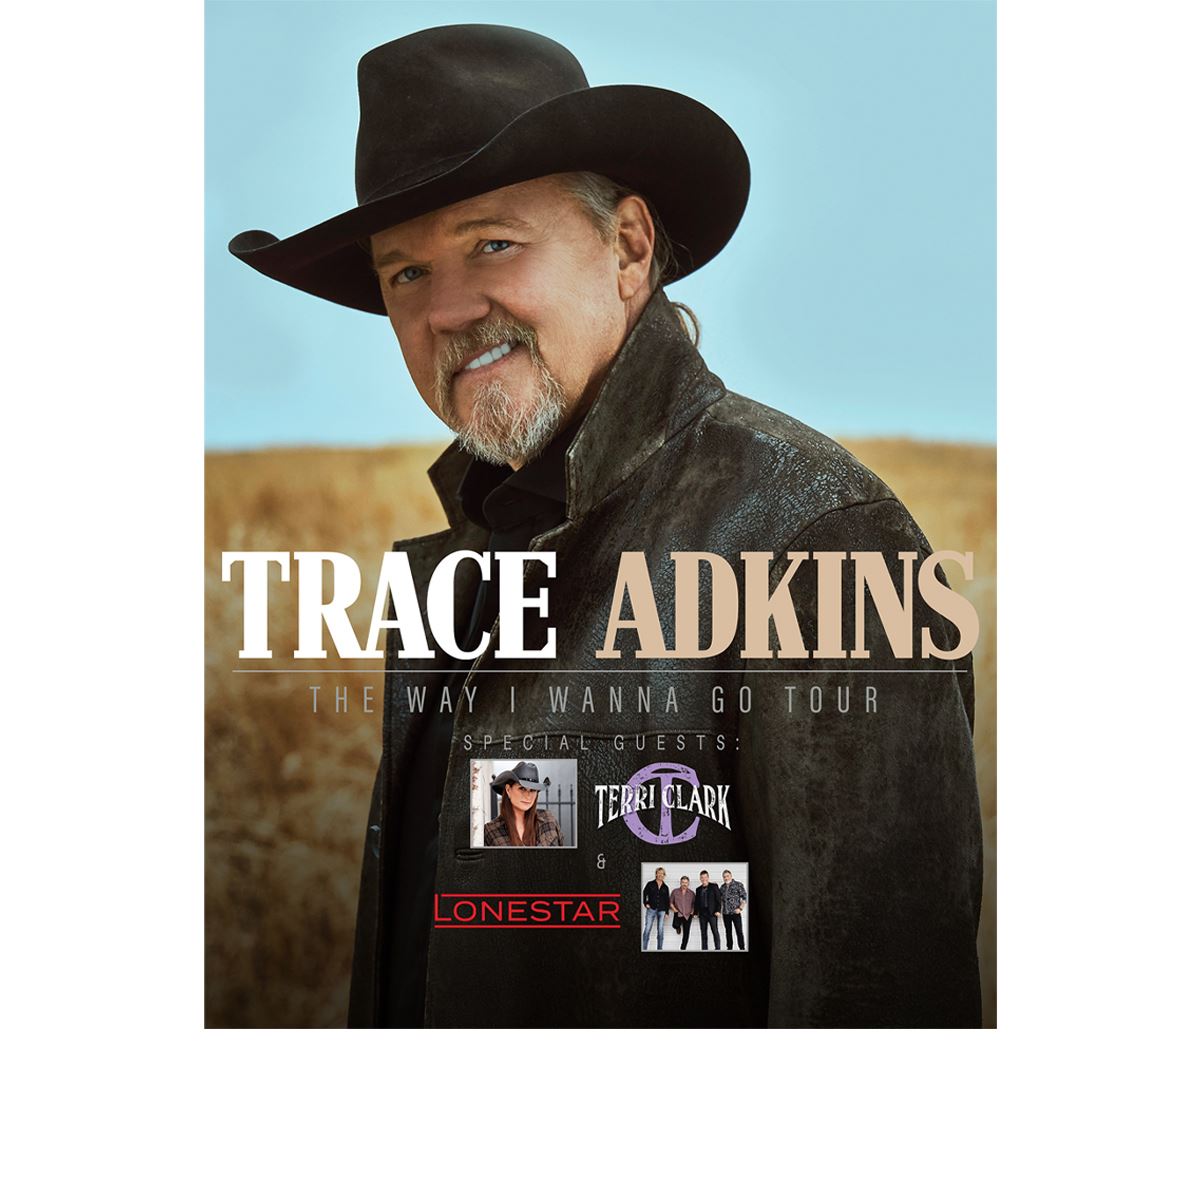 Trace Adkins with special guests Terri Clark and Lonestar